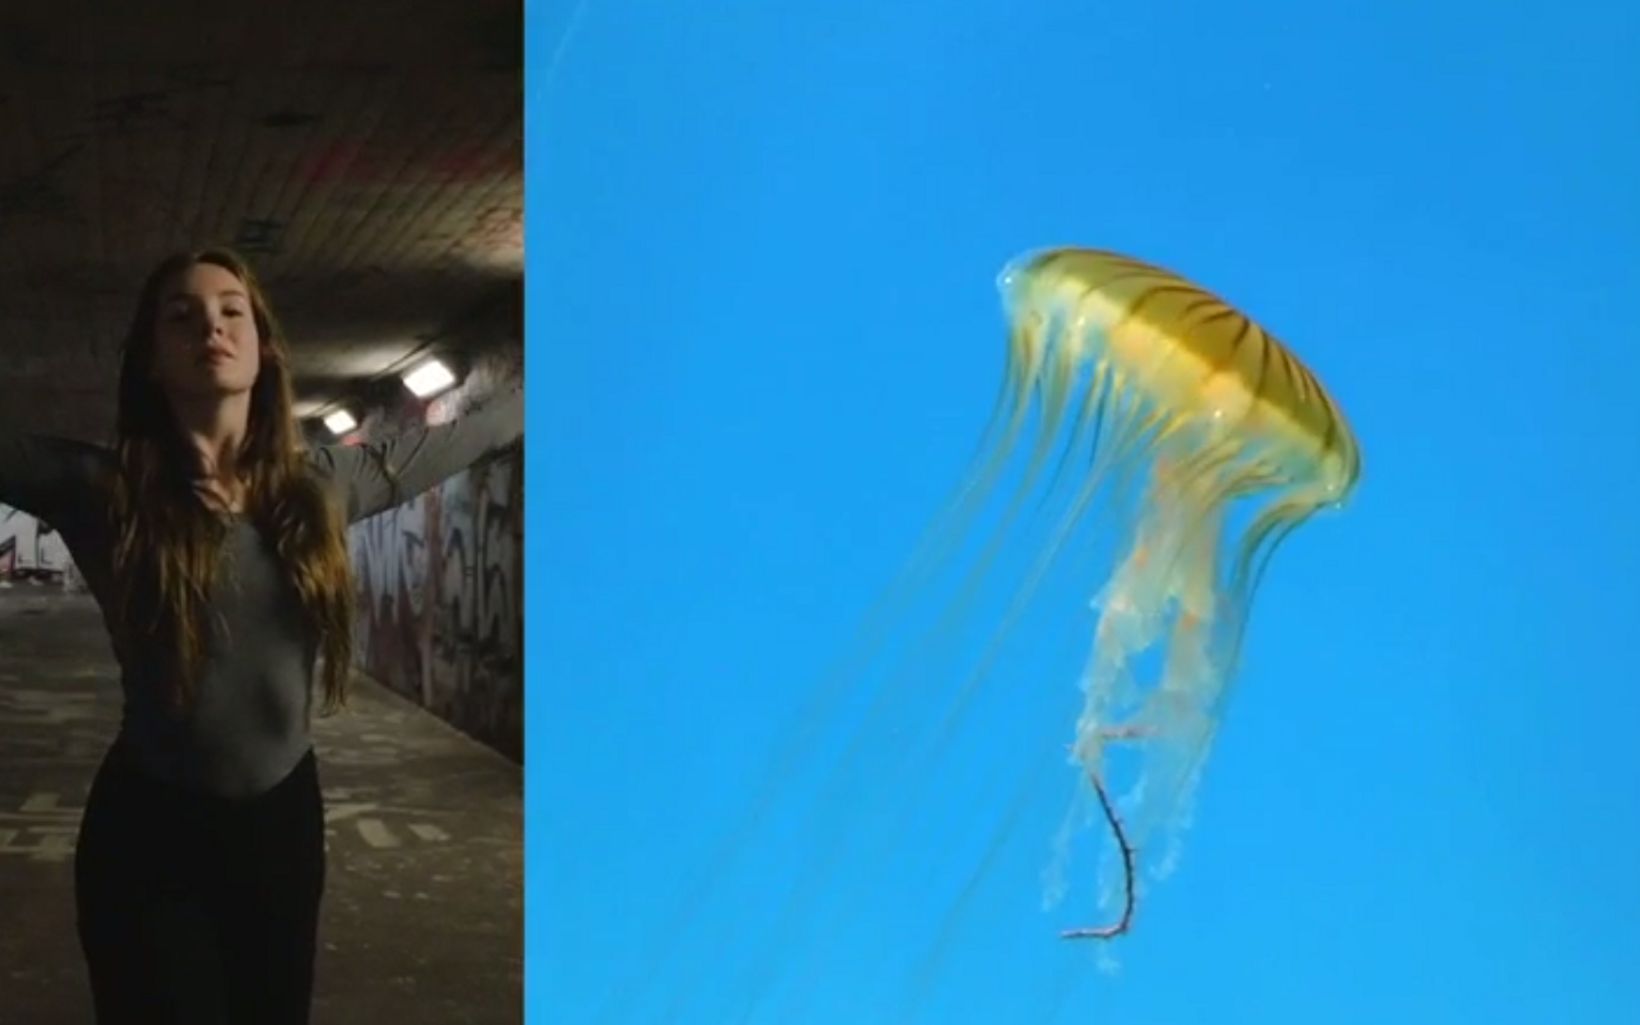 A split image with a woman standing in a graffiti-covered tunnel on the left and a yellow jellyfish floating in blue water on the right.